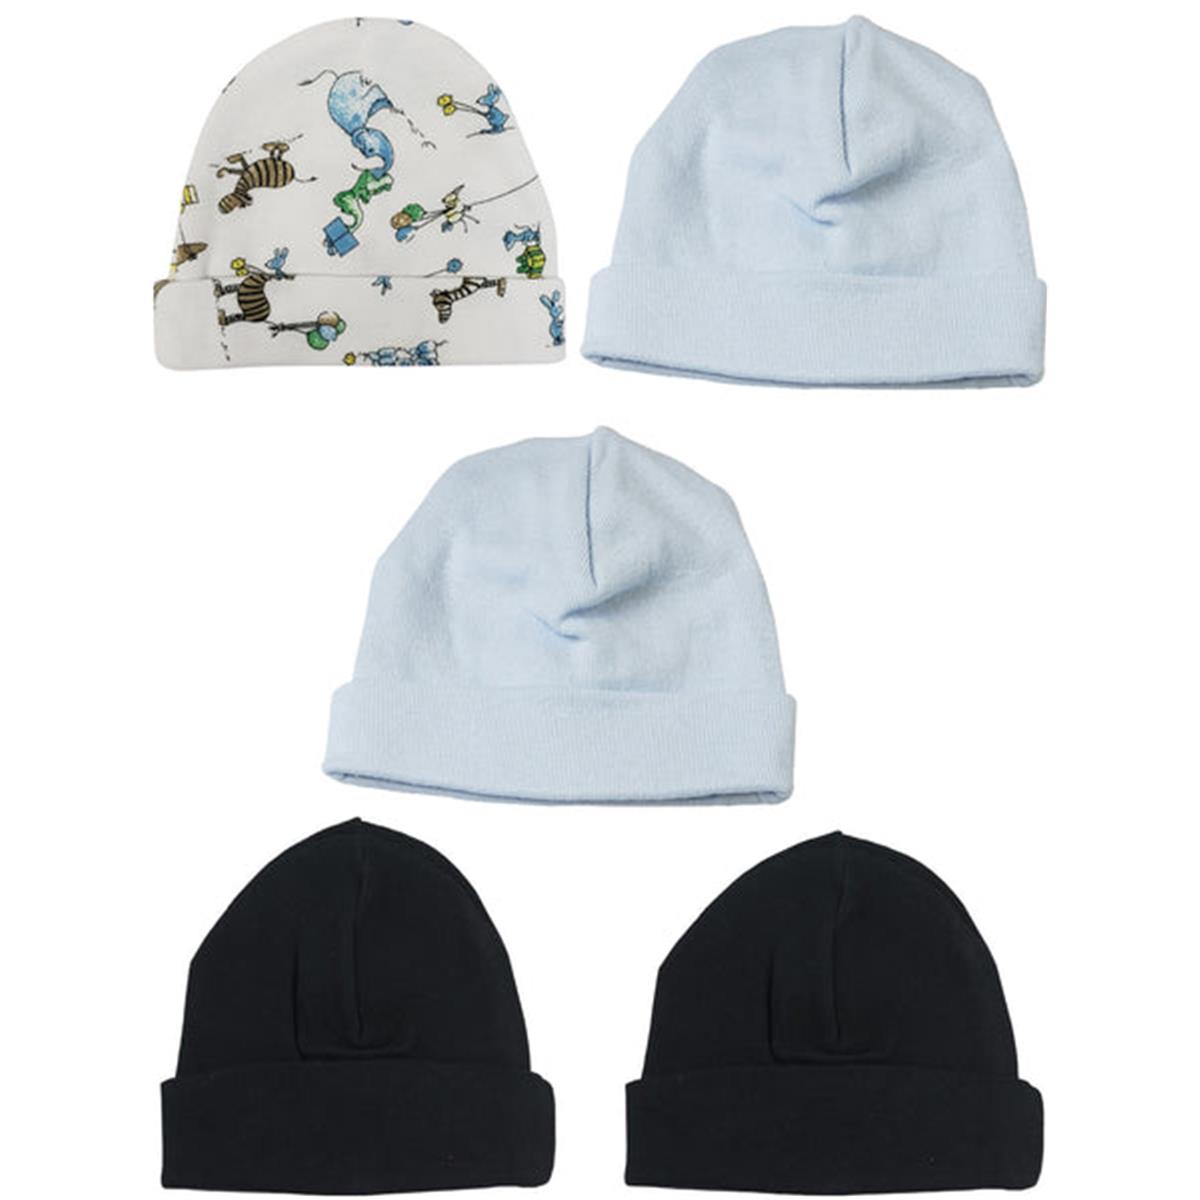 Picture of Bambini LS-0500 Boys Baby Caps - Blue&#44; Black & Print - One Size - 5 per Pack